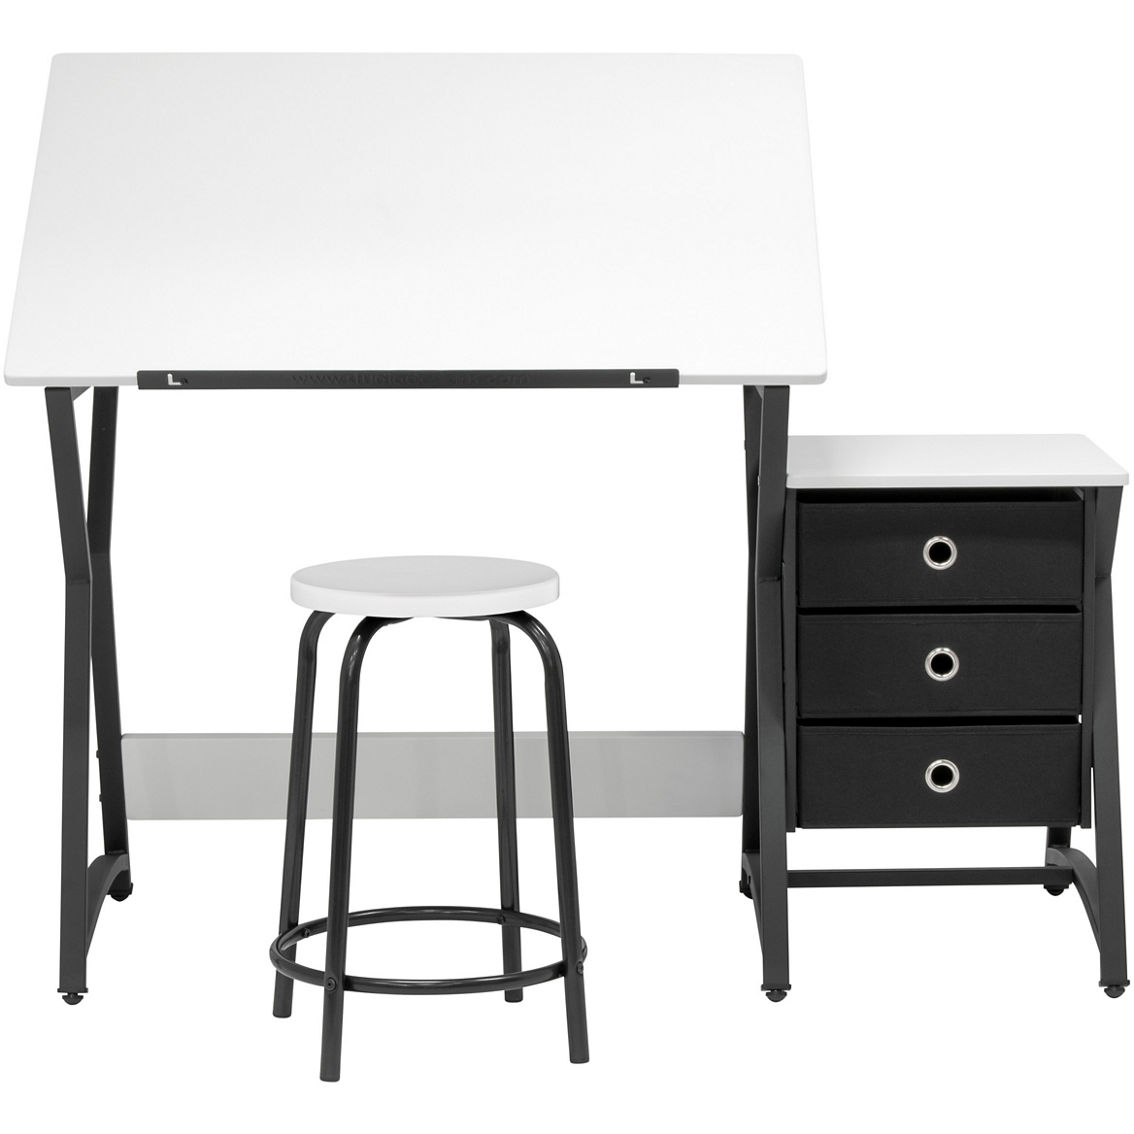 Studio Designs Hourglass Craft Center Angle Adjustable Drafting Table with Drawers - Image 5 of 10